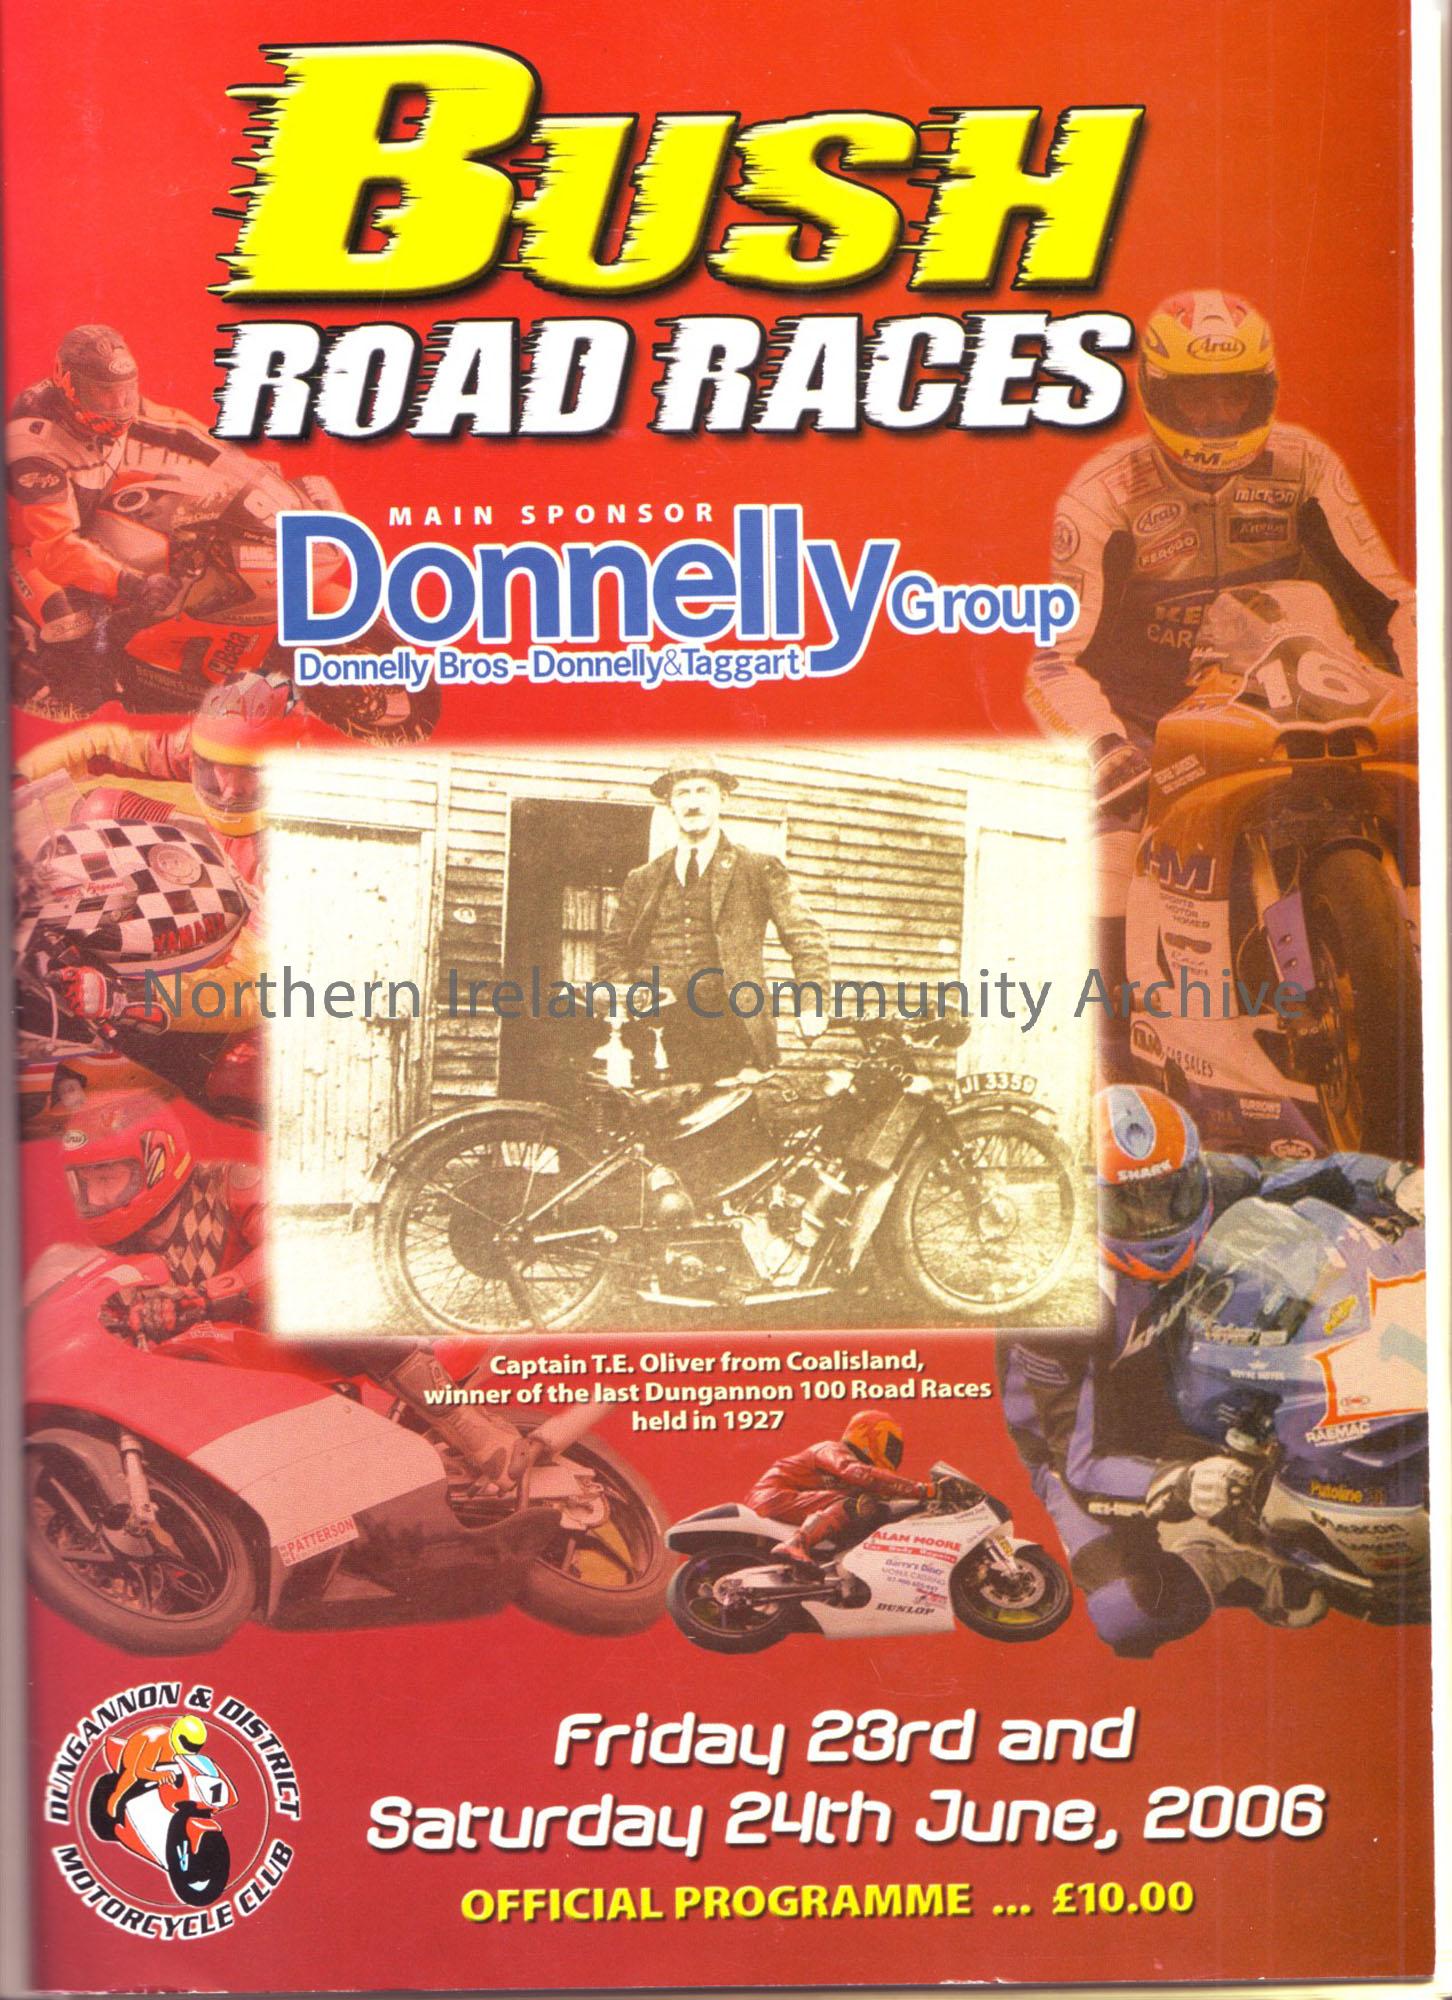 Bush Road Races official programme, Friday 23rd and Saturday 24th June, 2006. Score sheets included inside